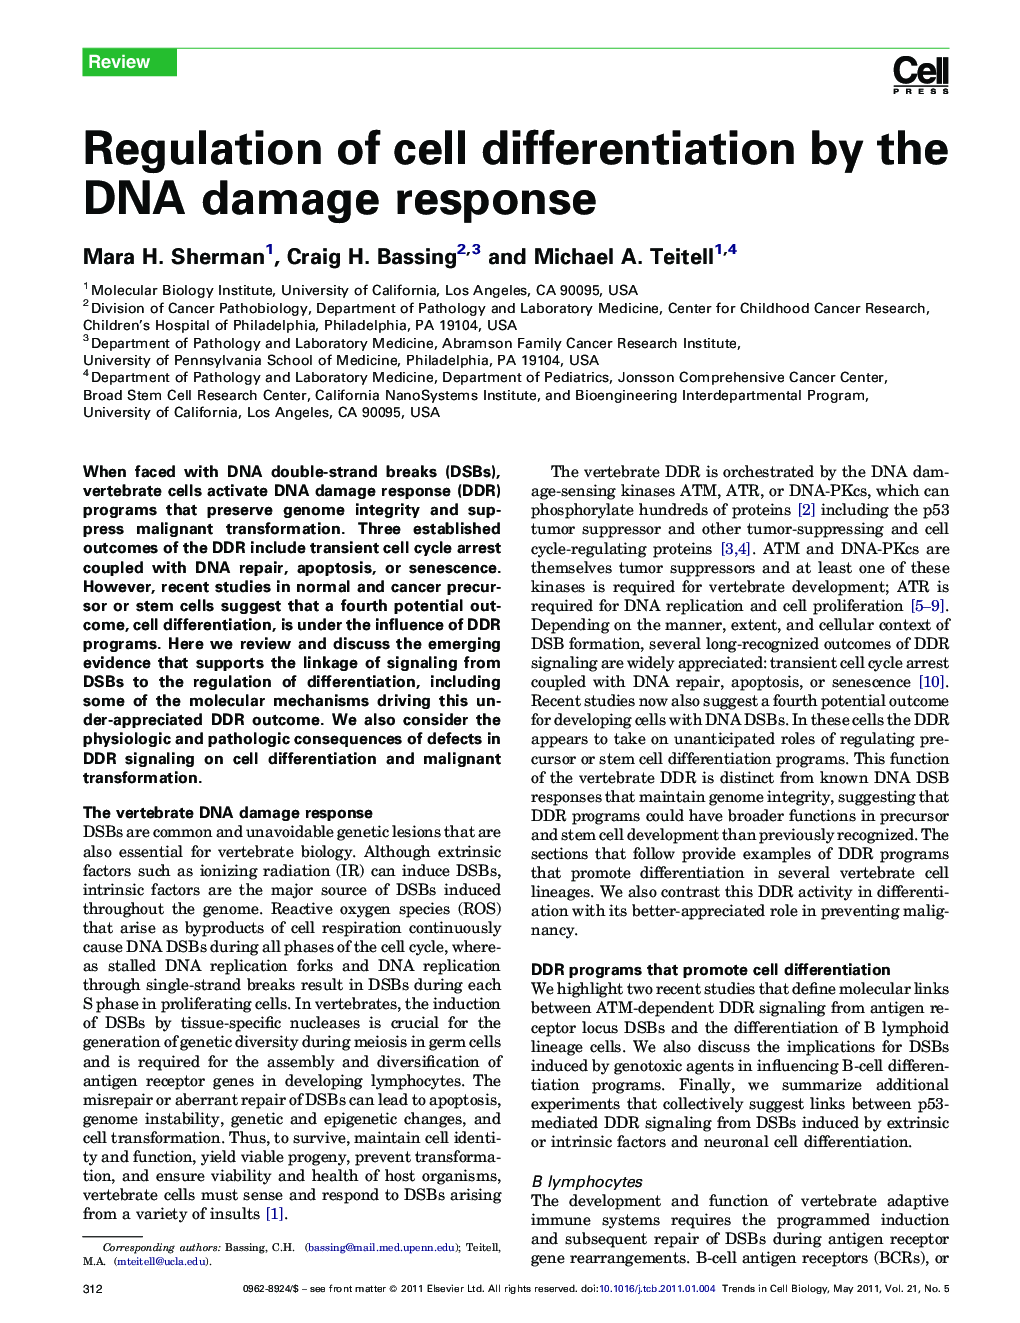 Regulation of cell differentiation by the DNA damage response